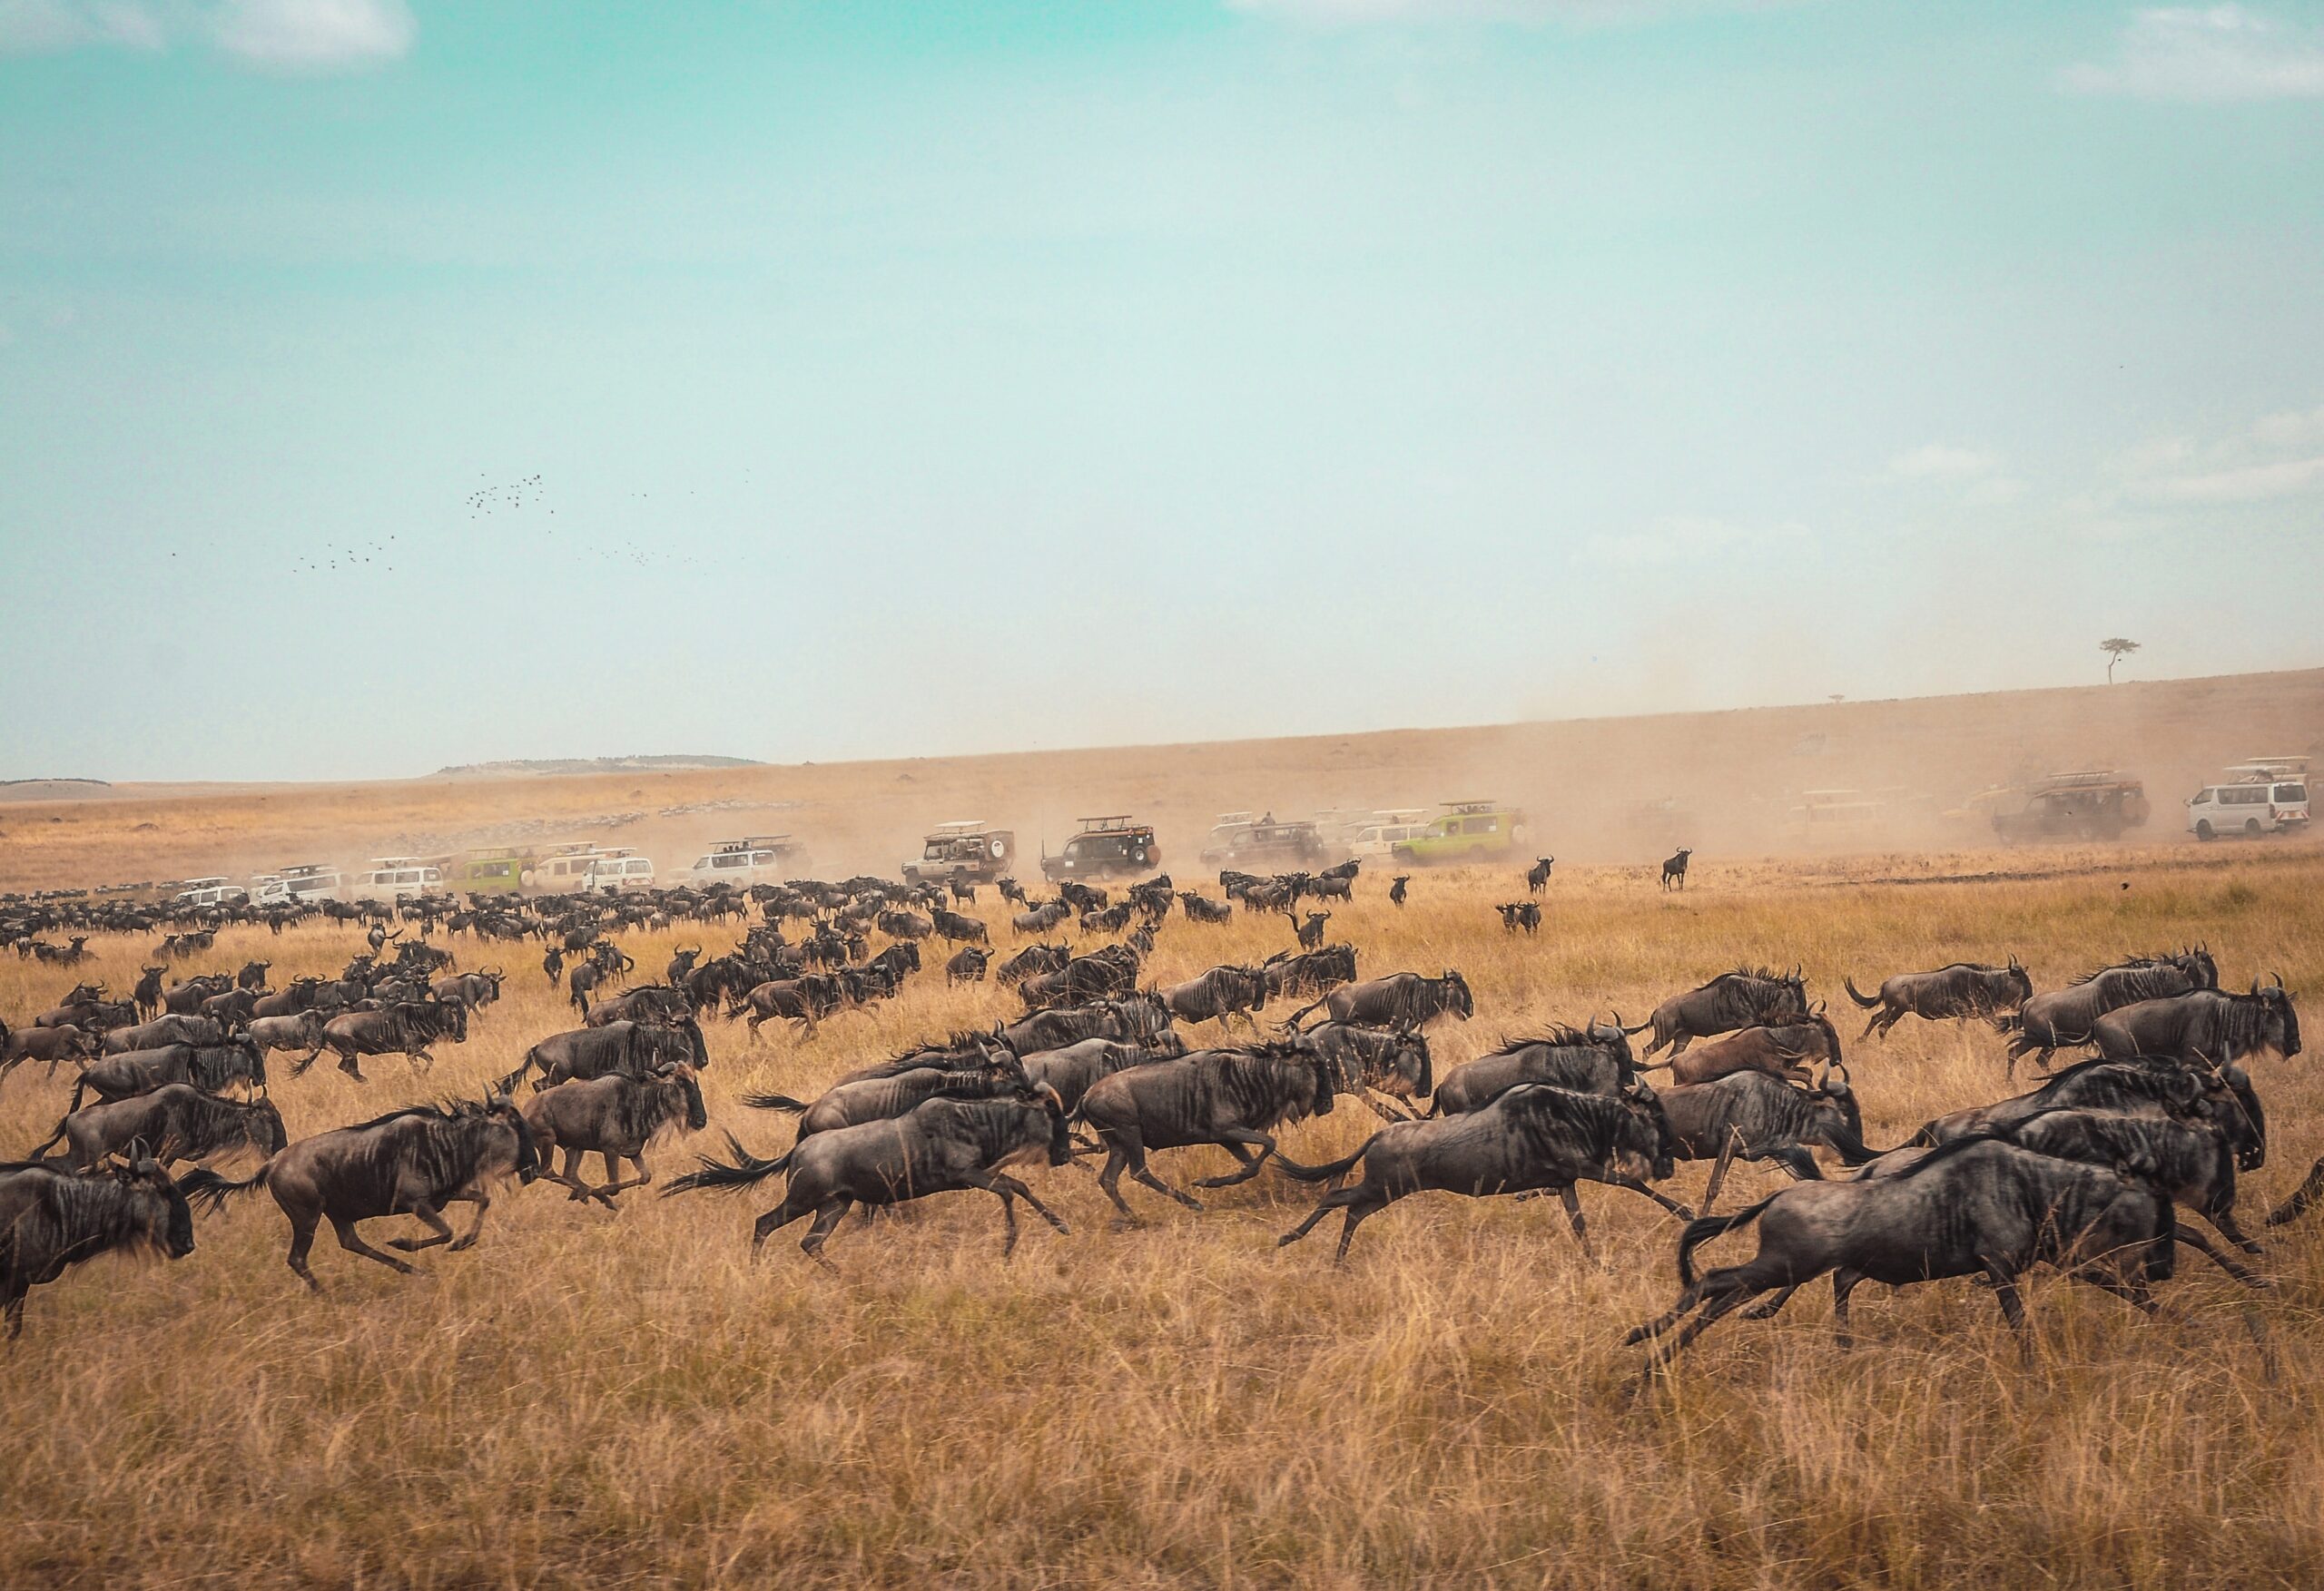 The greatest show on earth: mind-blowing facts about animal migrations